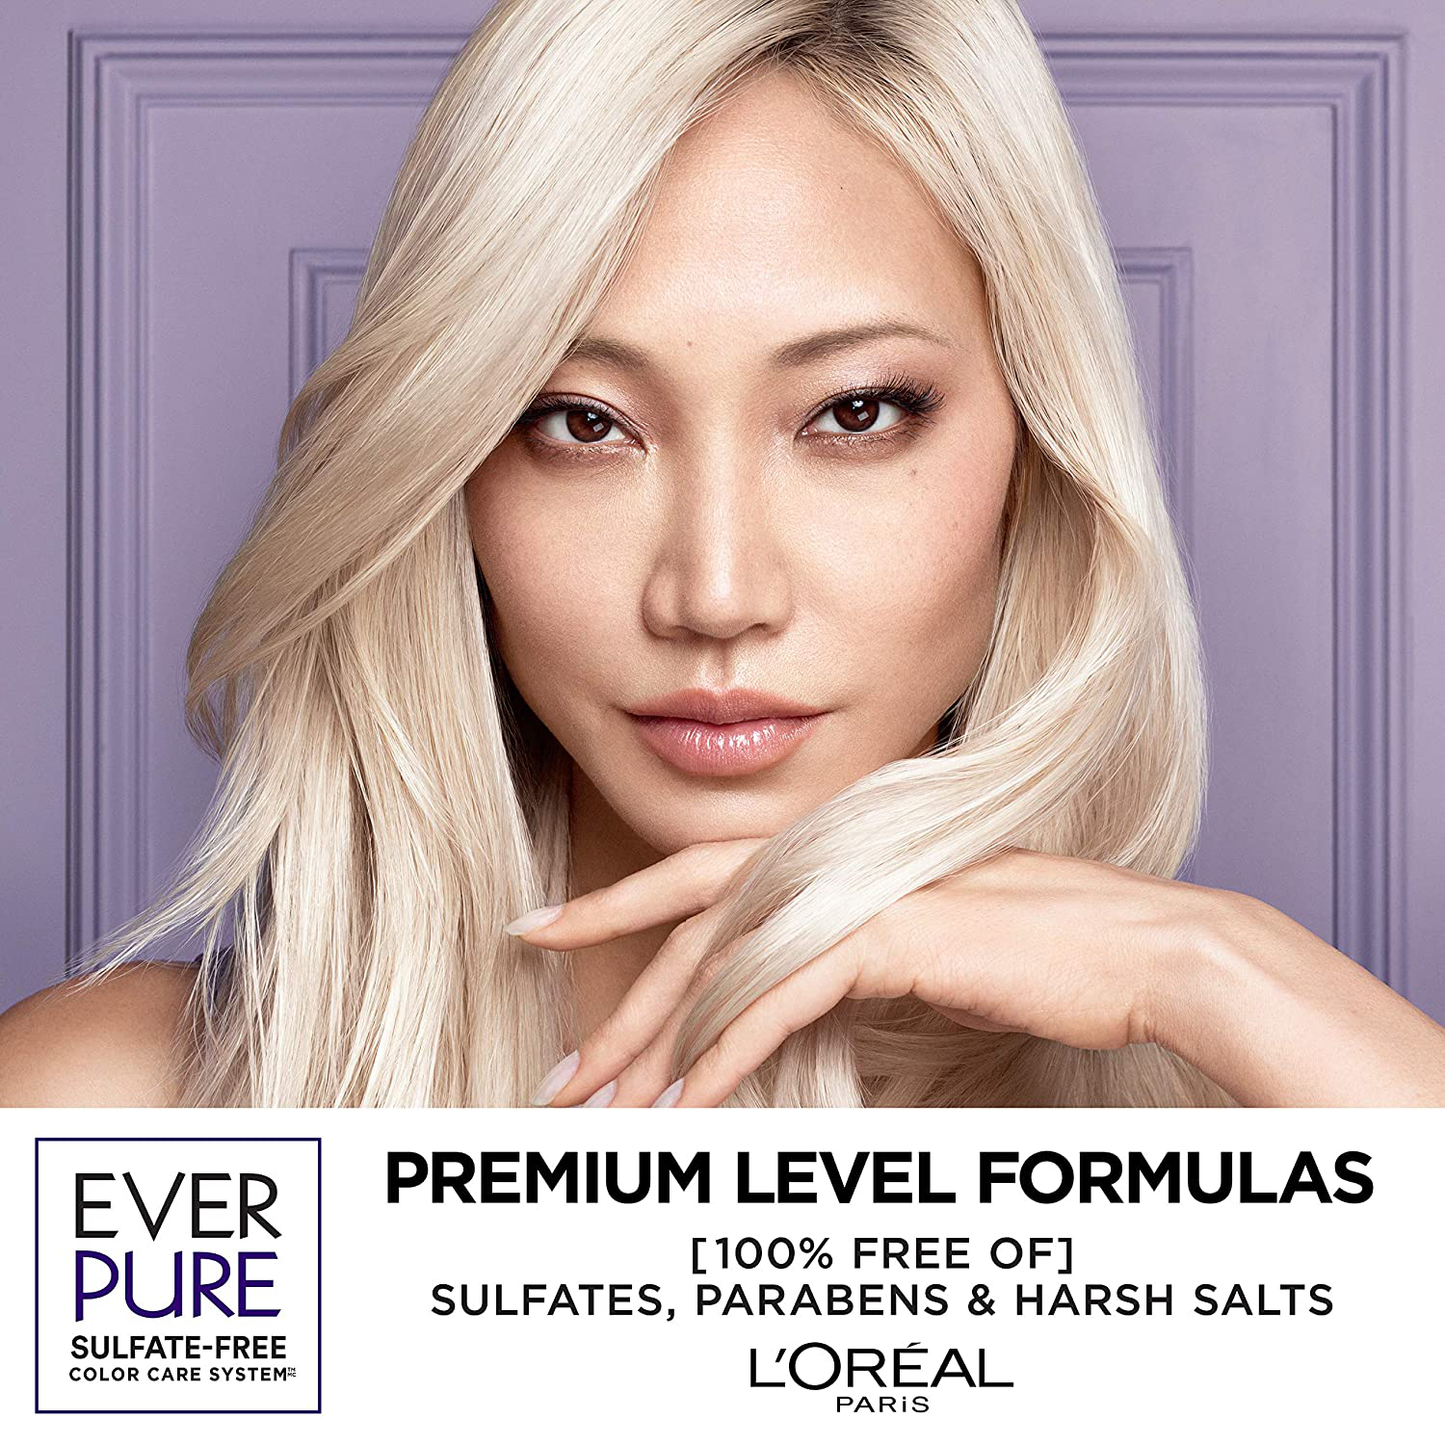 L'Oreal Paris Hair Care EverPure Sulfate Free Brass Toning Purple Conditioner for Blonde, Bleached, Silver, or Brown Highlighted Hair, 6.8 Fl; Oz (Packaging May Vary)